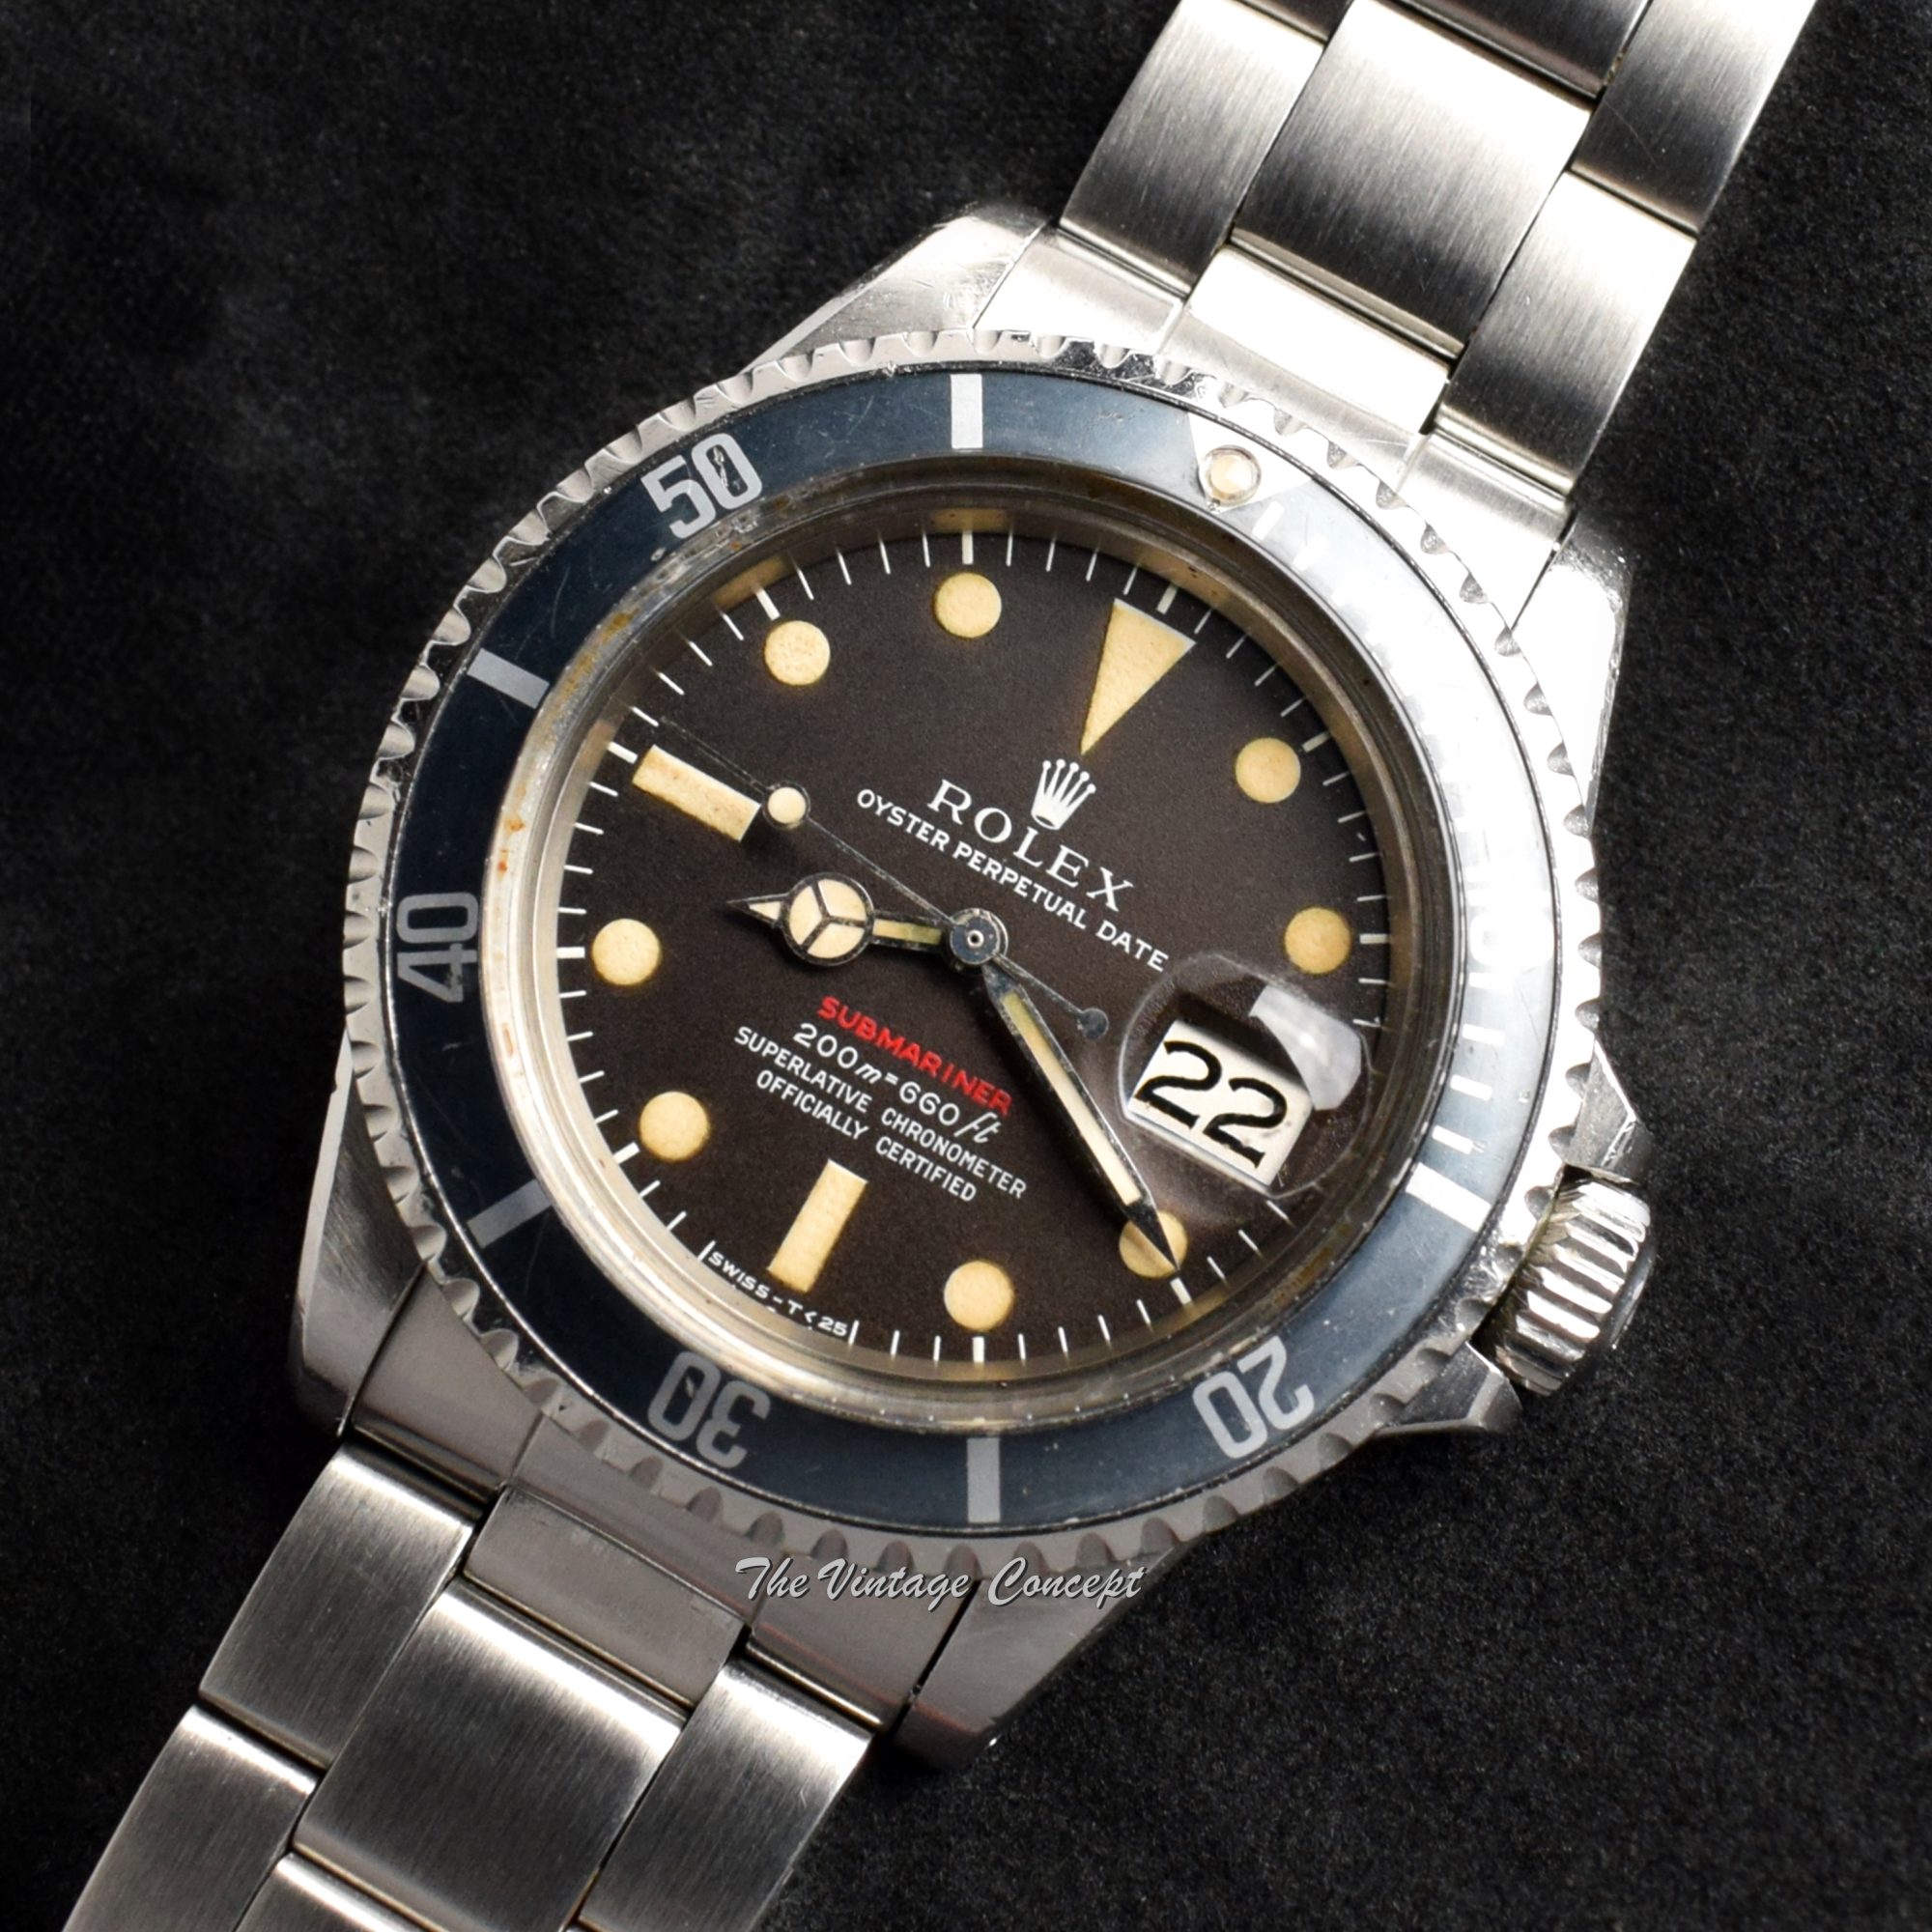 Rolex Submariner Single Red MK III Tropical Dial 1680 (SOLD) - The Vintage Concept